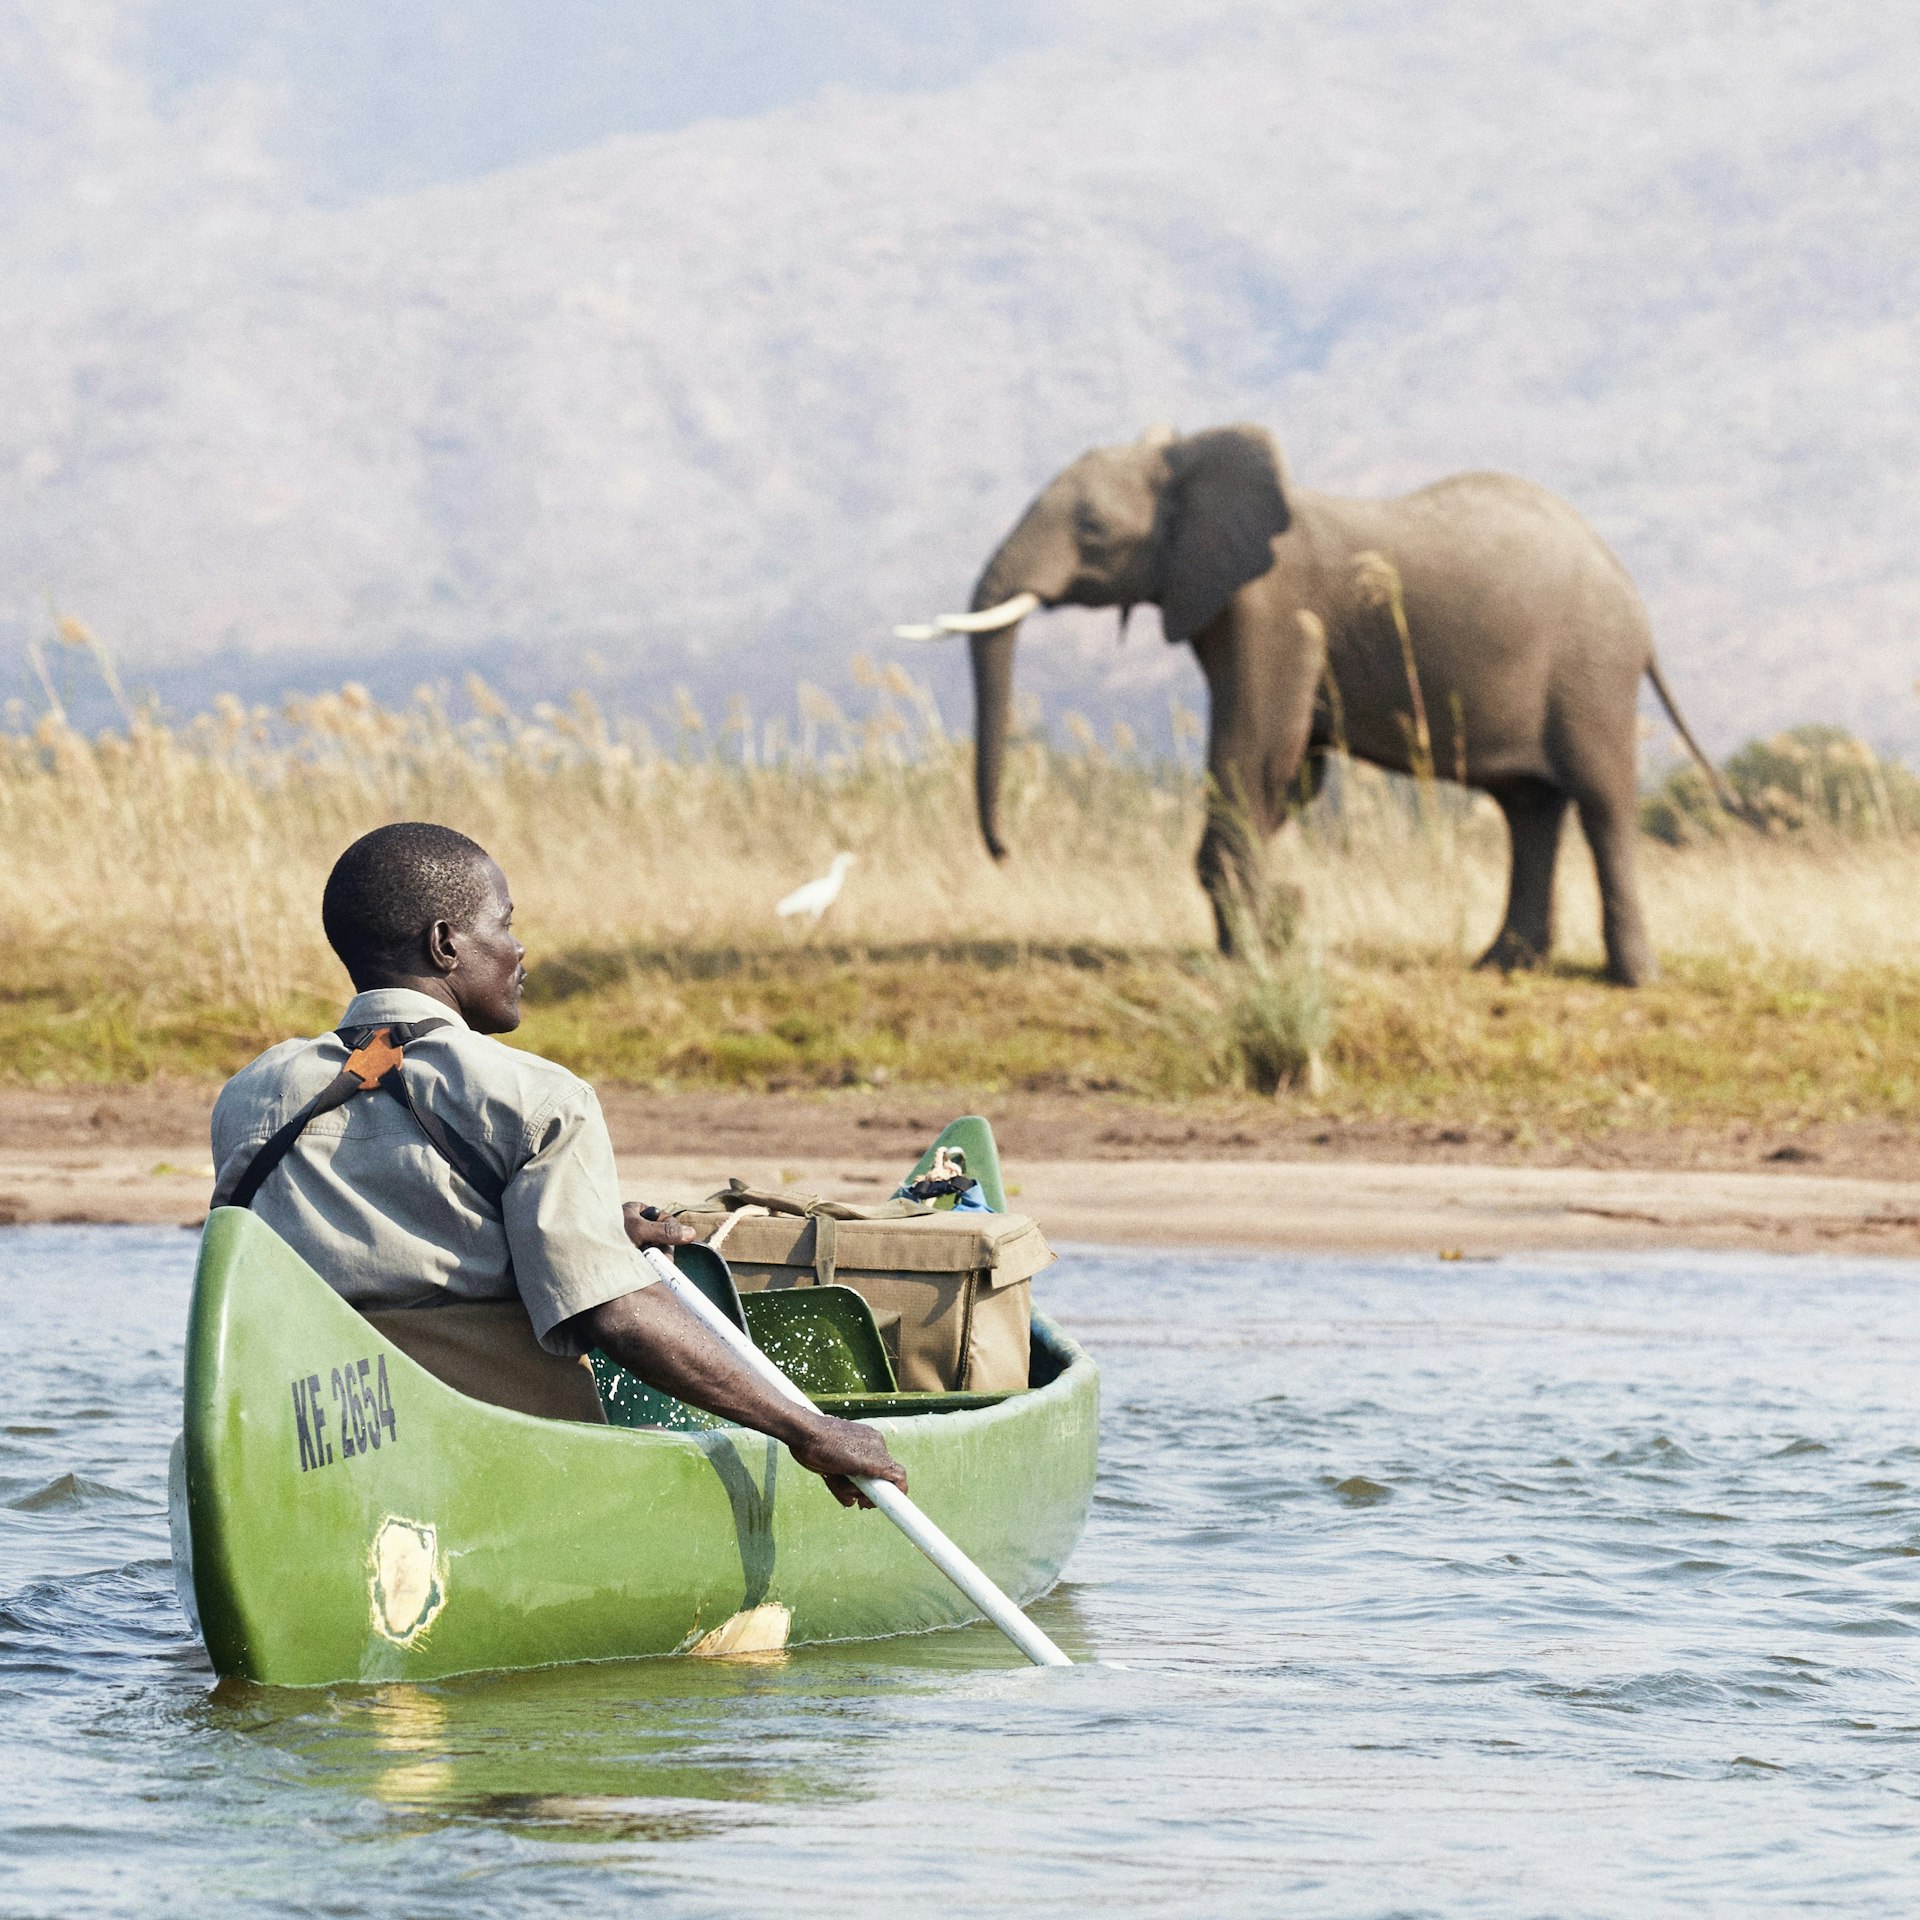 A safari guide in a canoe on the Zambezi River in Mana Pools National Park looks to the bank where a large elephant is standing, Zimbabwe